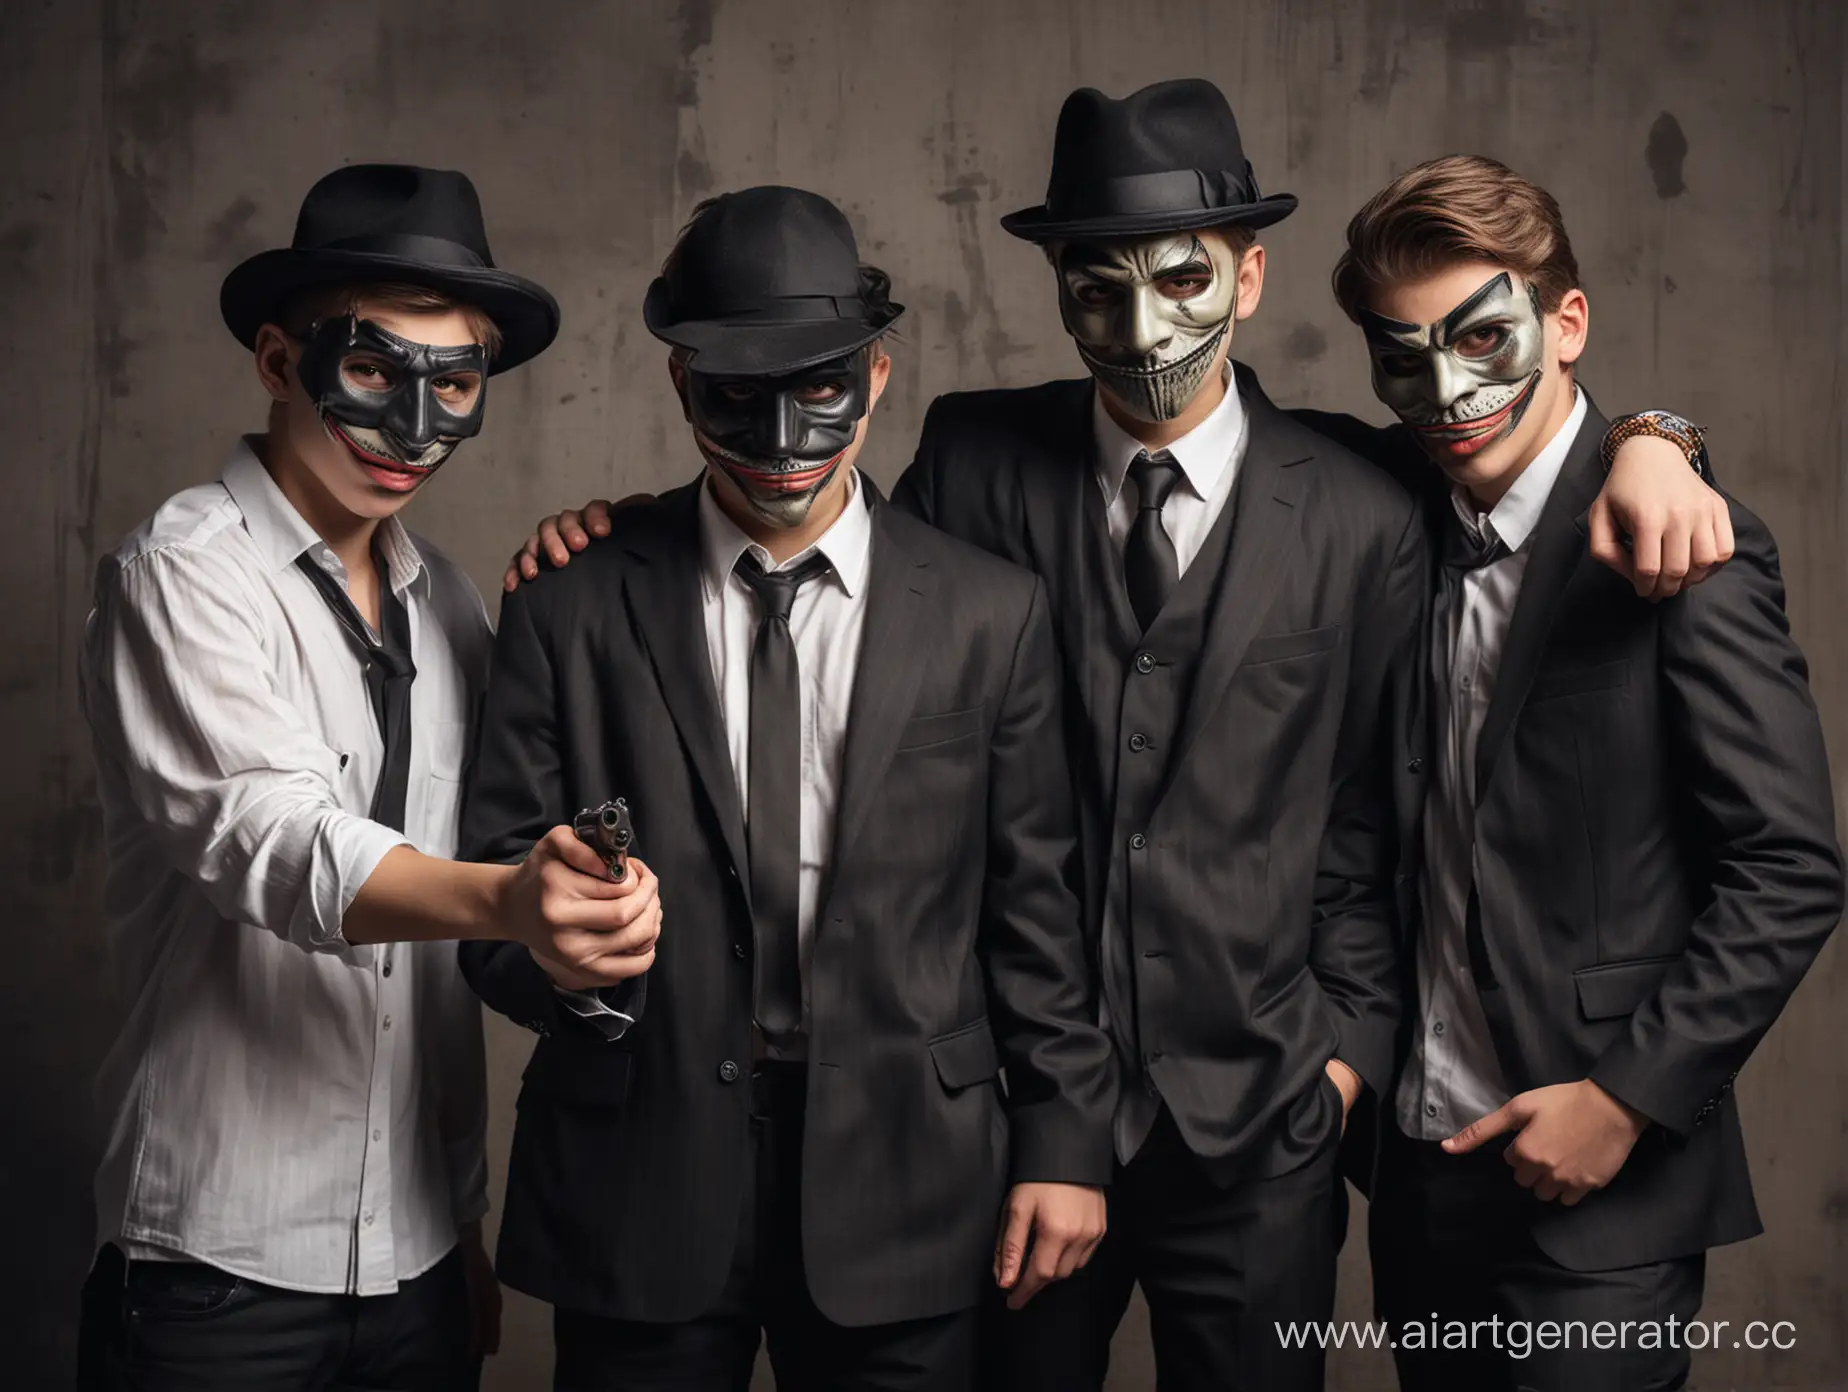 Teenager-Playing-Mafia-Game-in-Gangster-Costume-with-Friends